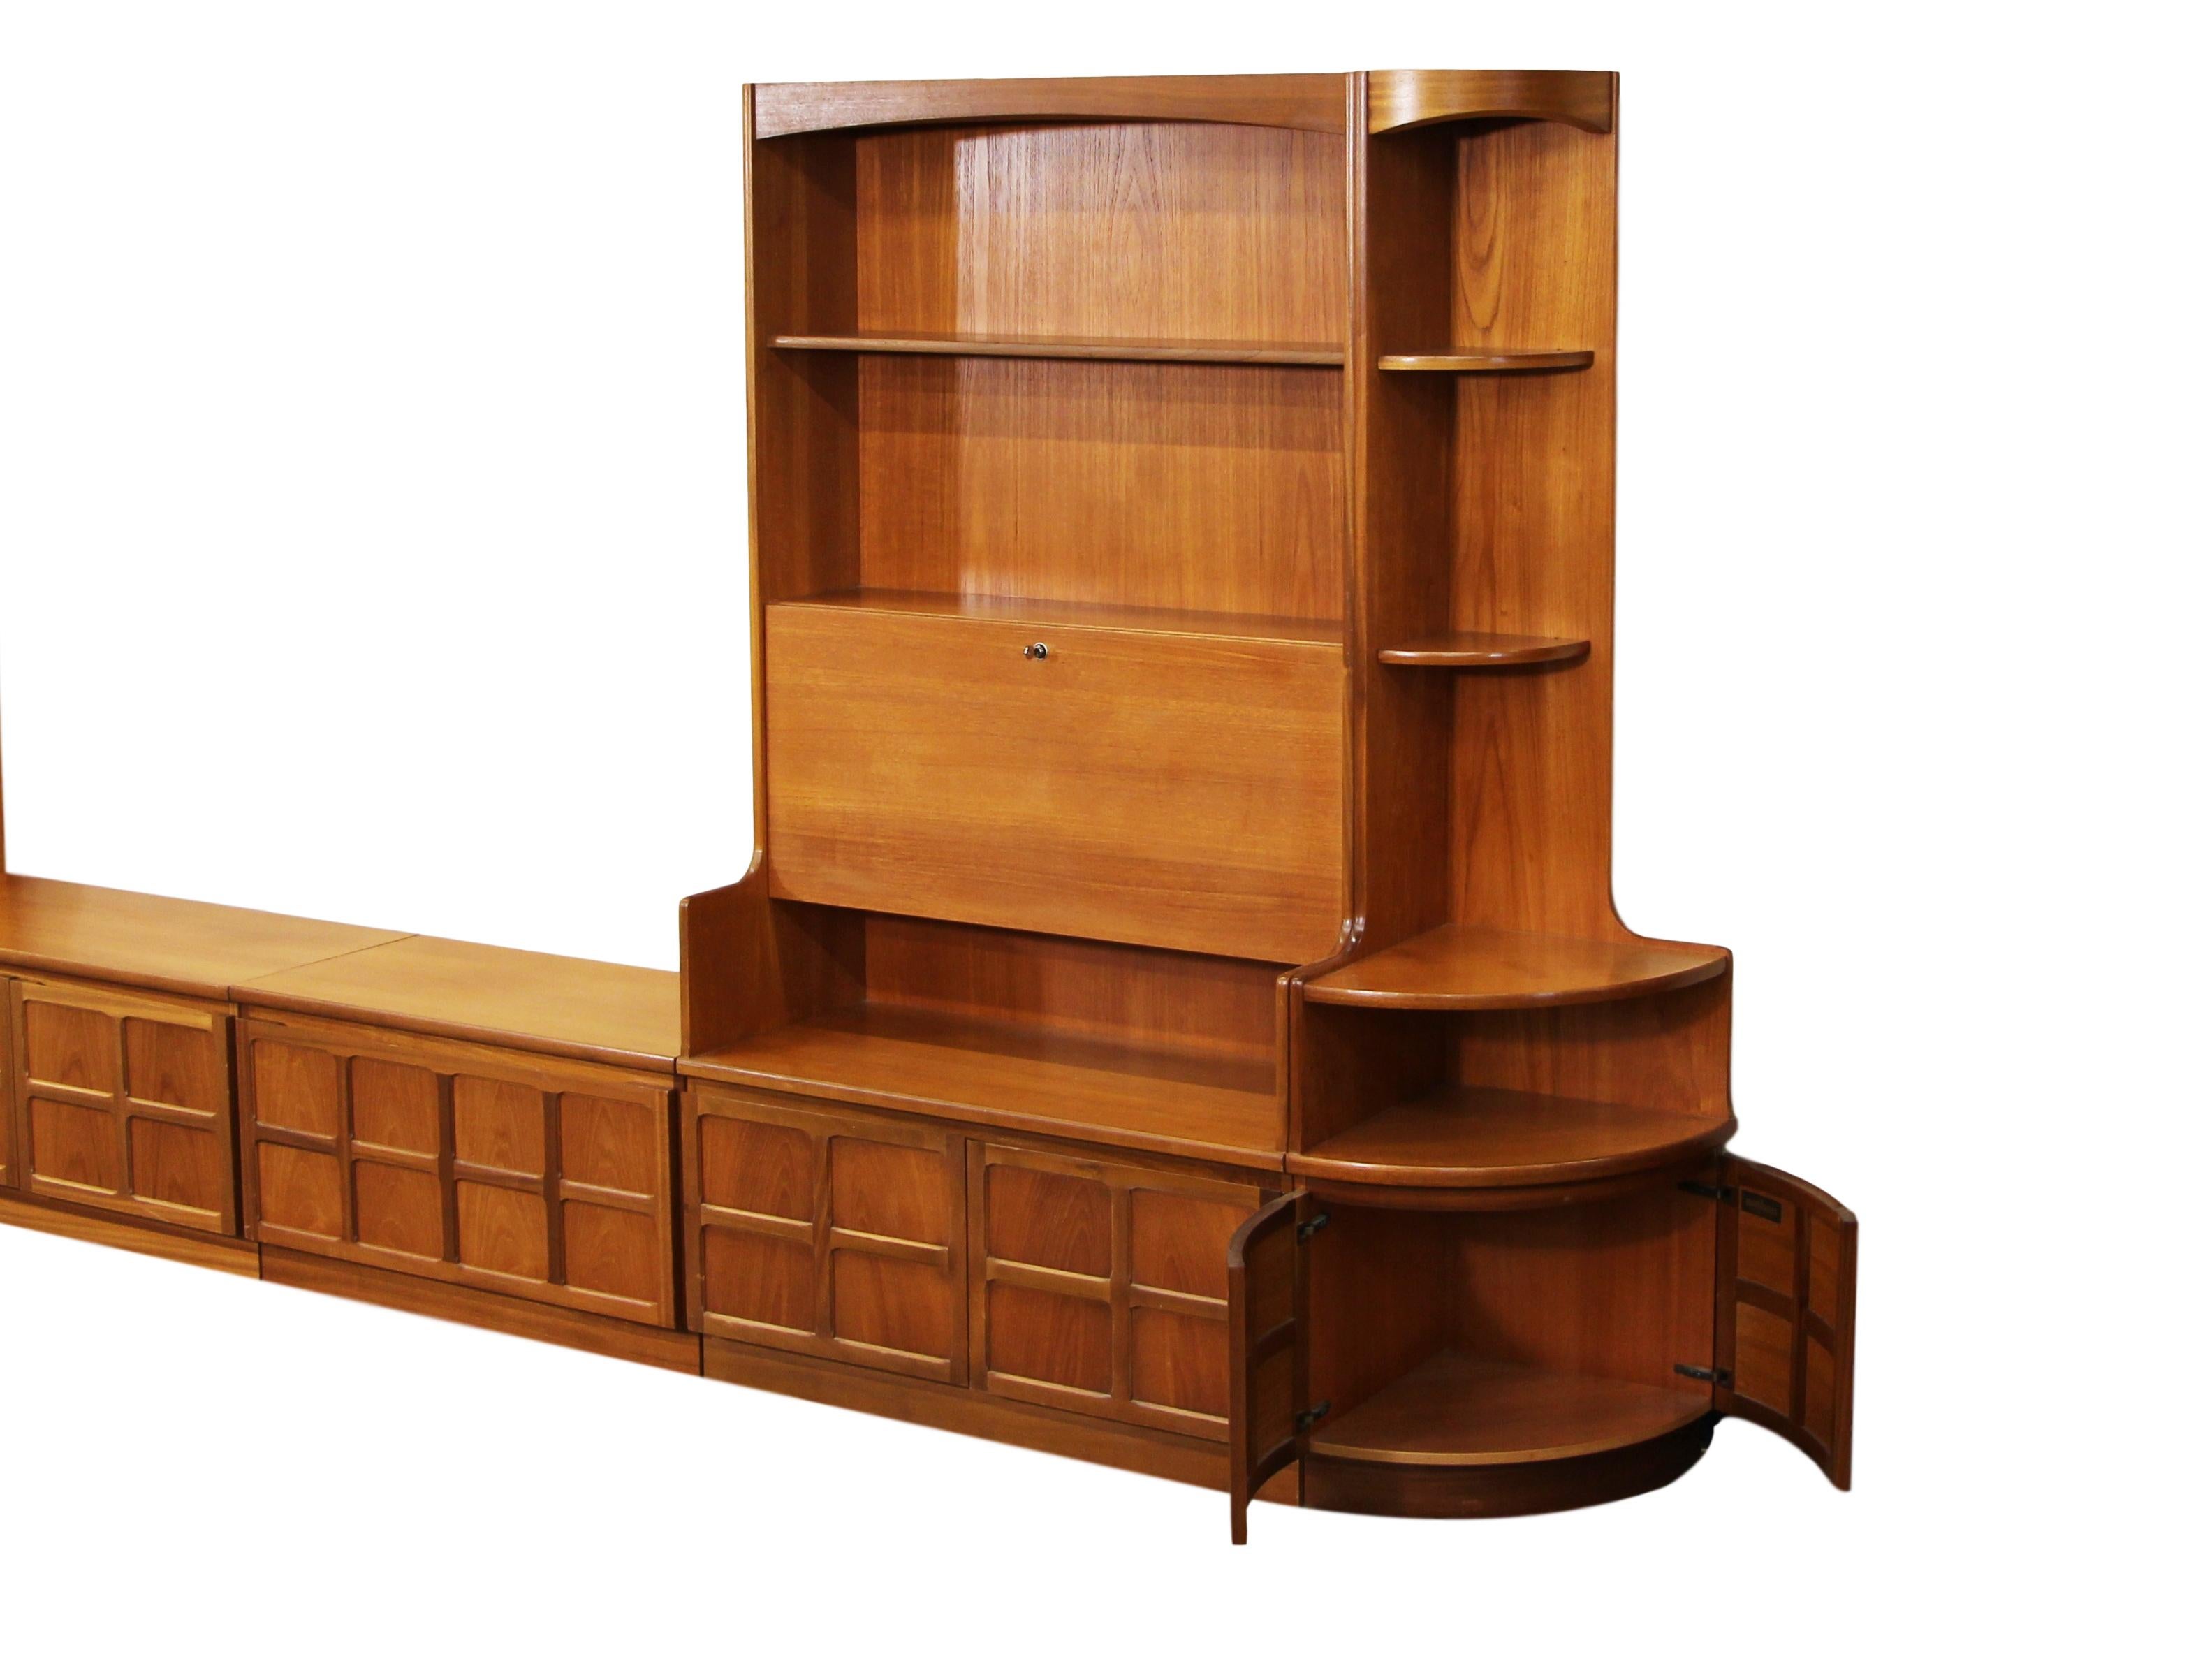 Fantastic teak wall unit made by Nathan Furniture. Made in England.

Features a tall glass door unit, a tall drop down door unit with functioning lock and key, a lower 2 door cabinet and a lower drop down door cabinet with sliding shelf to house